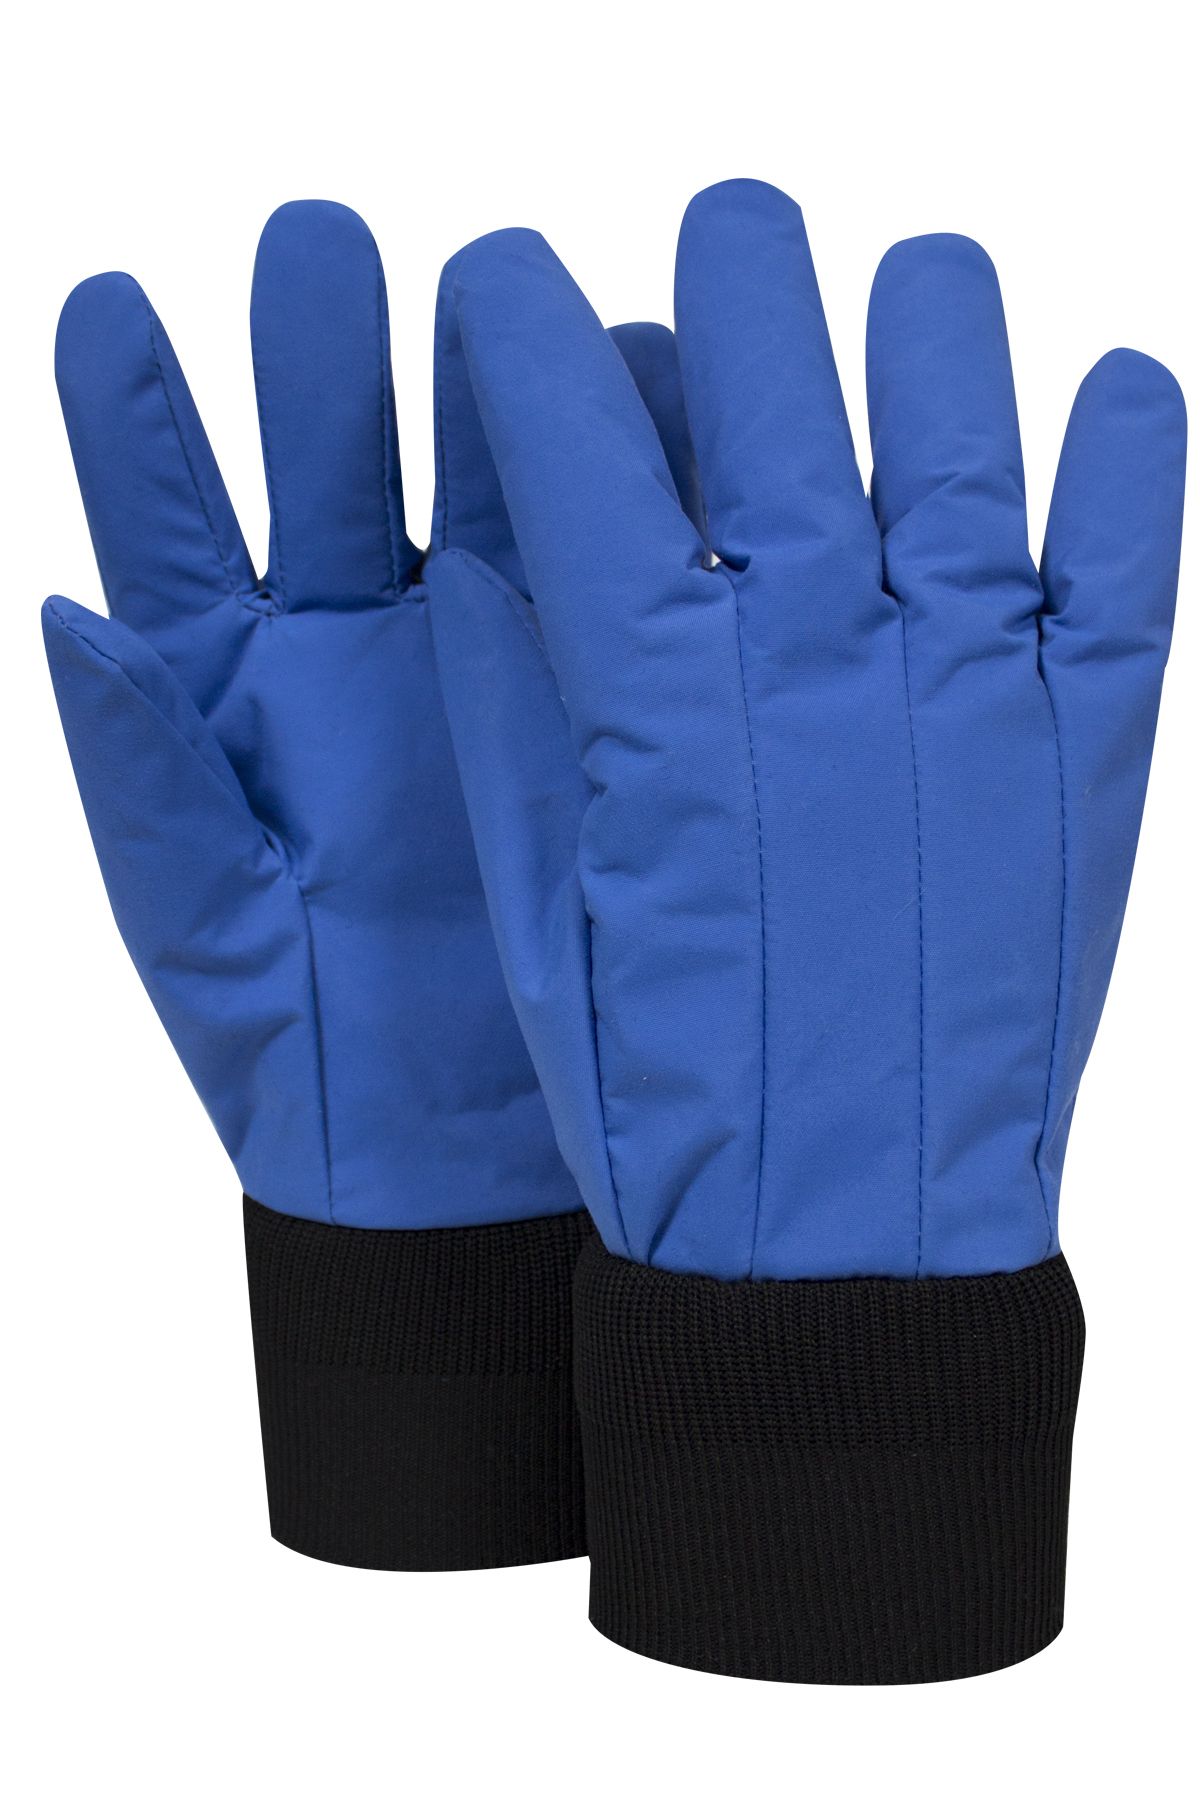 National Safety Apparel Water Resistant Wrist Length Cryogenic Gloves, 12" (pair)